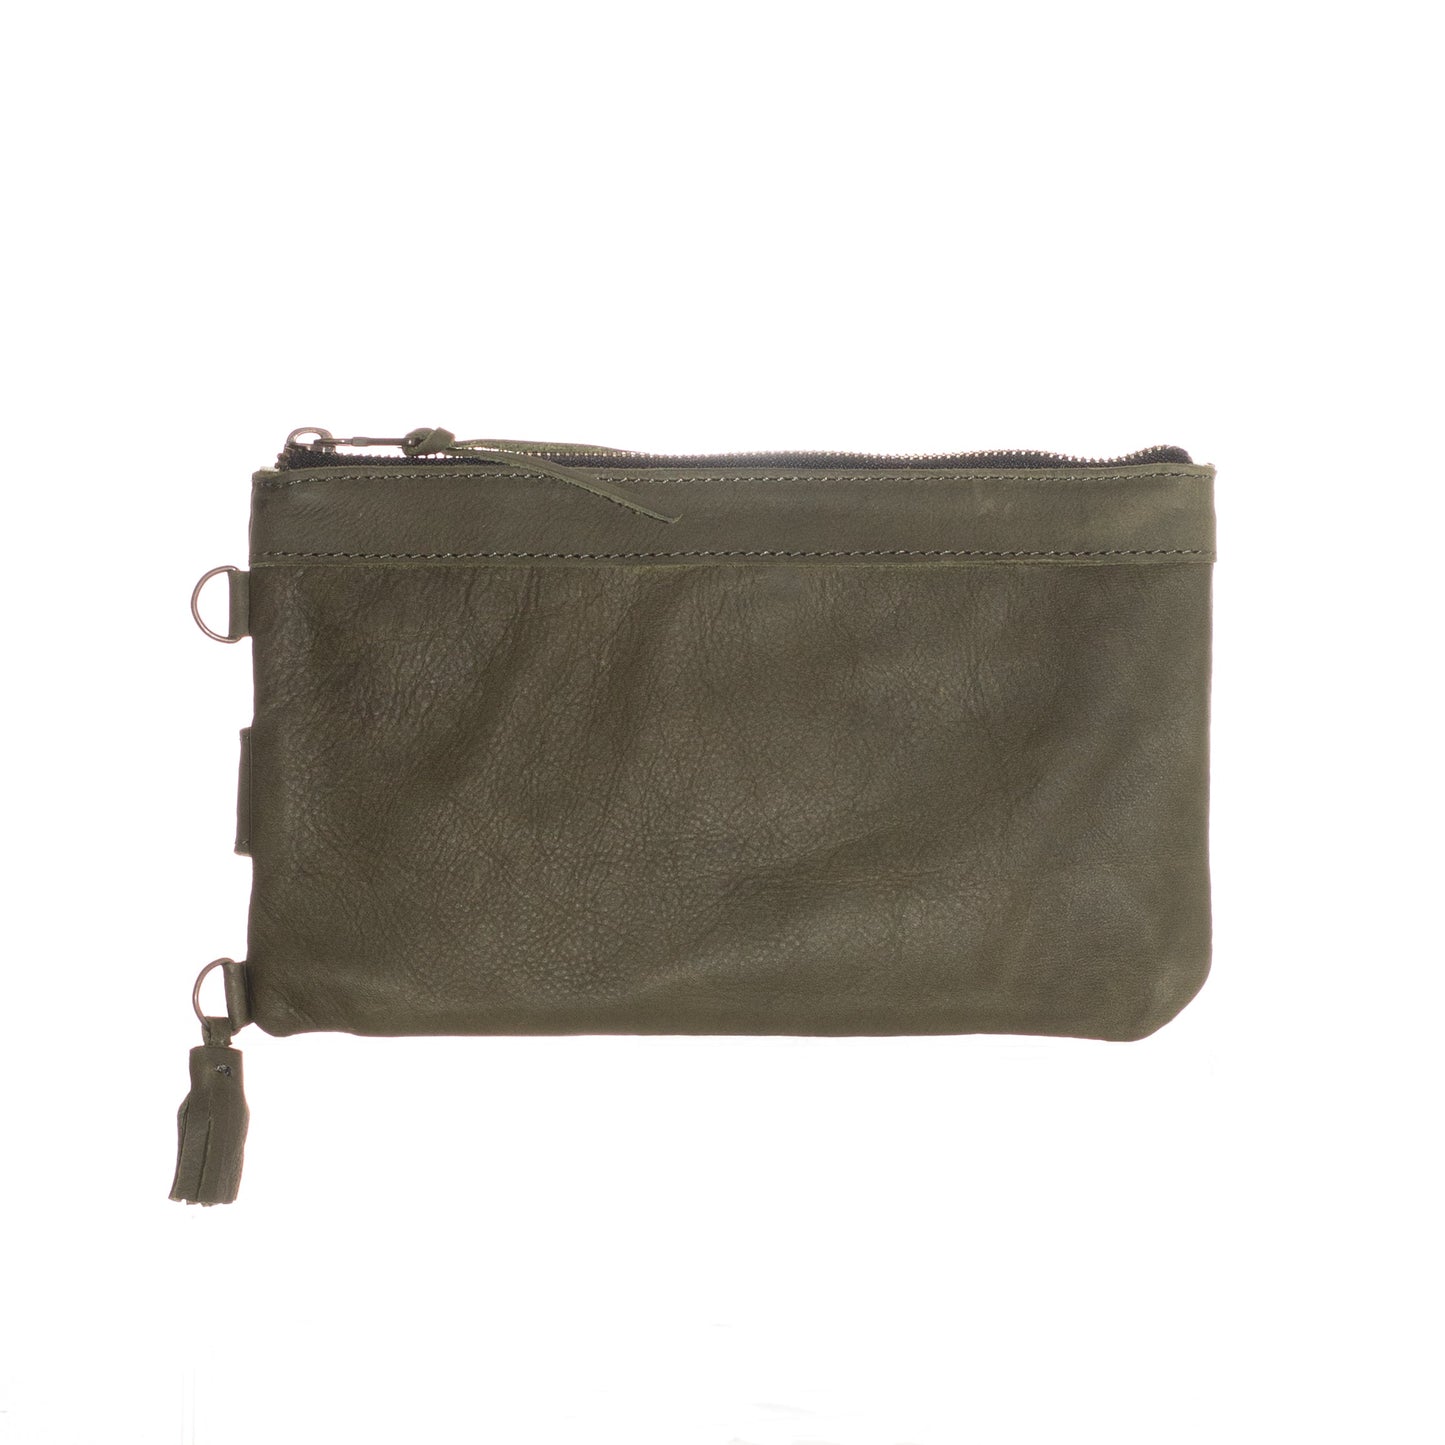 EVERYTHING CLUTCH - MEXICO COLLECTION - FULL LEATHER - OLIVE